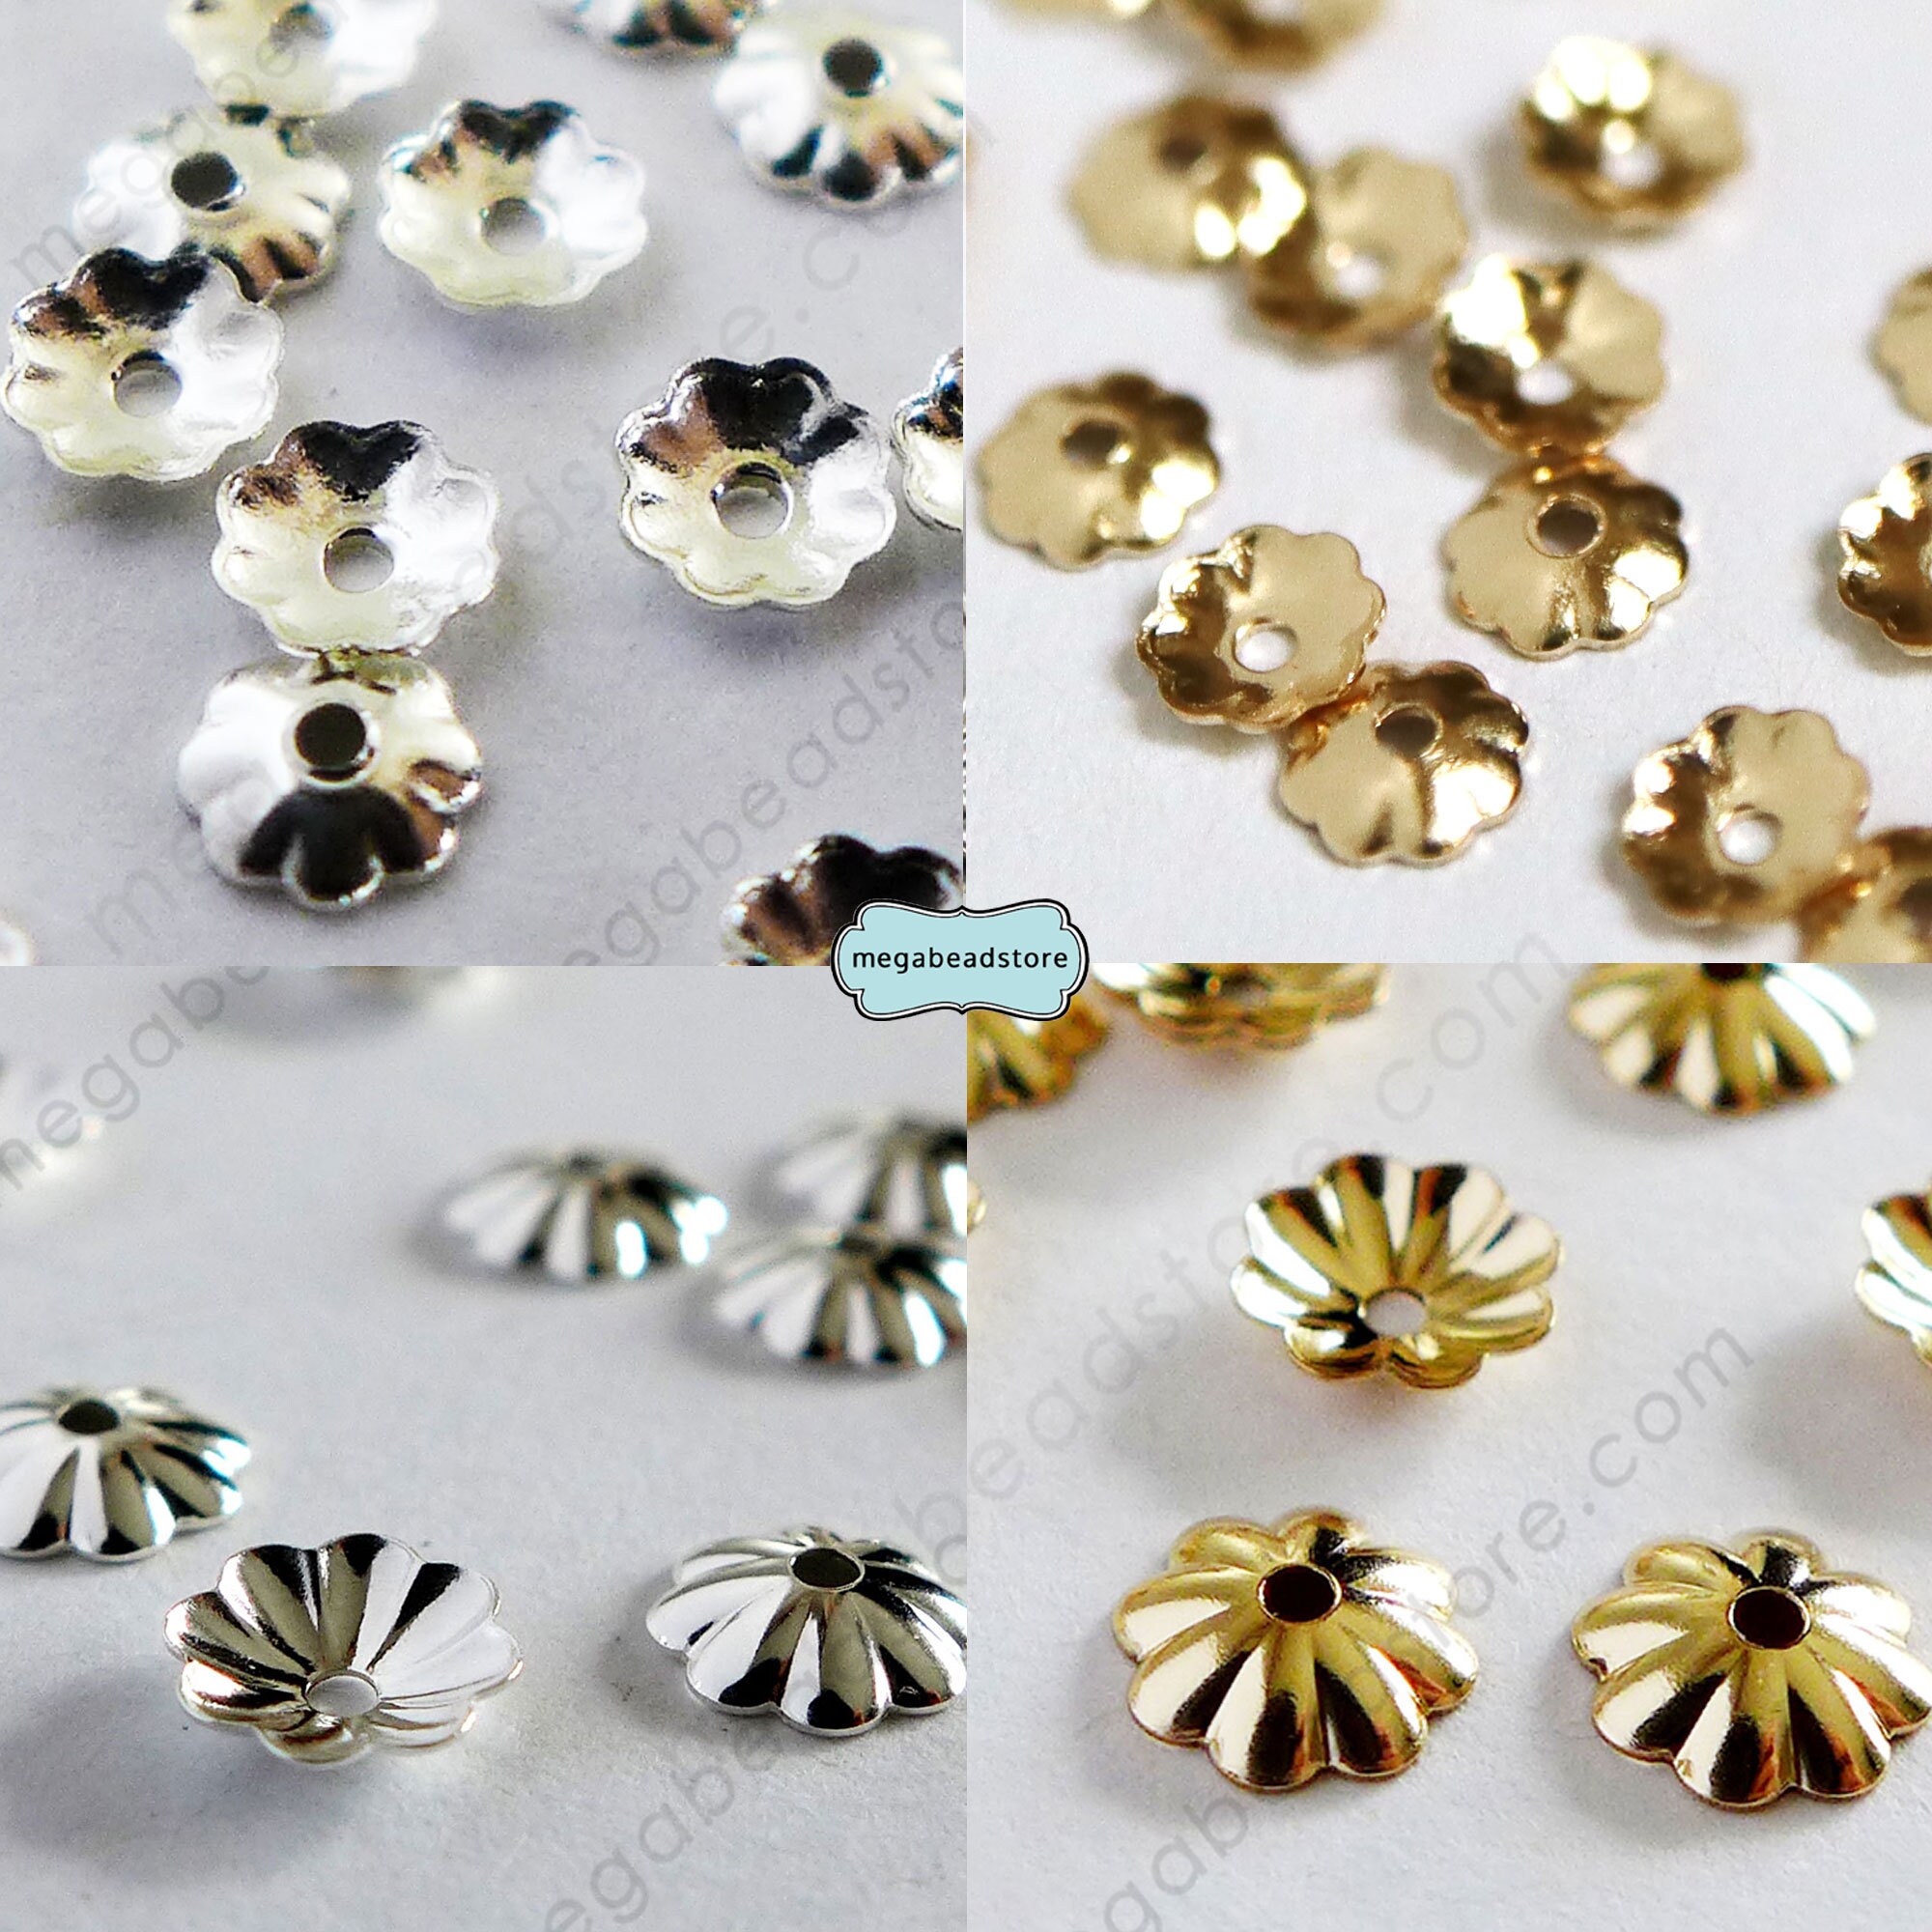 3mm Tiny Flower Bead Caps Sterling Silver - 100 pcs-C95-3